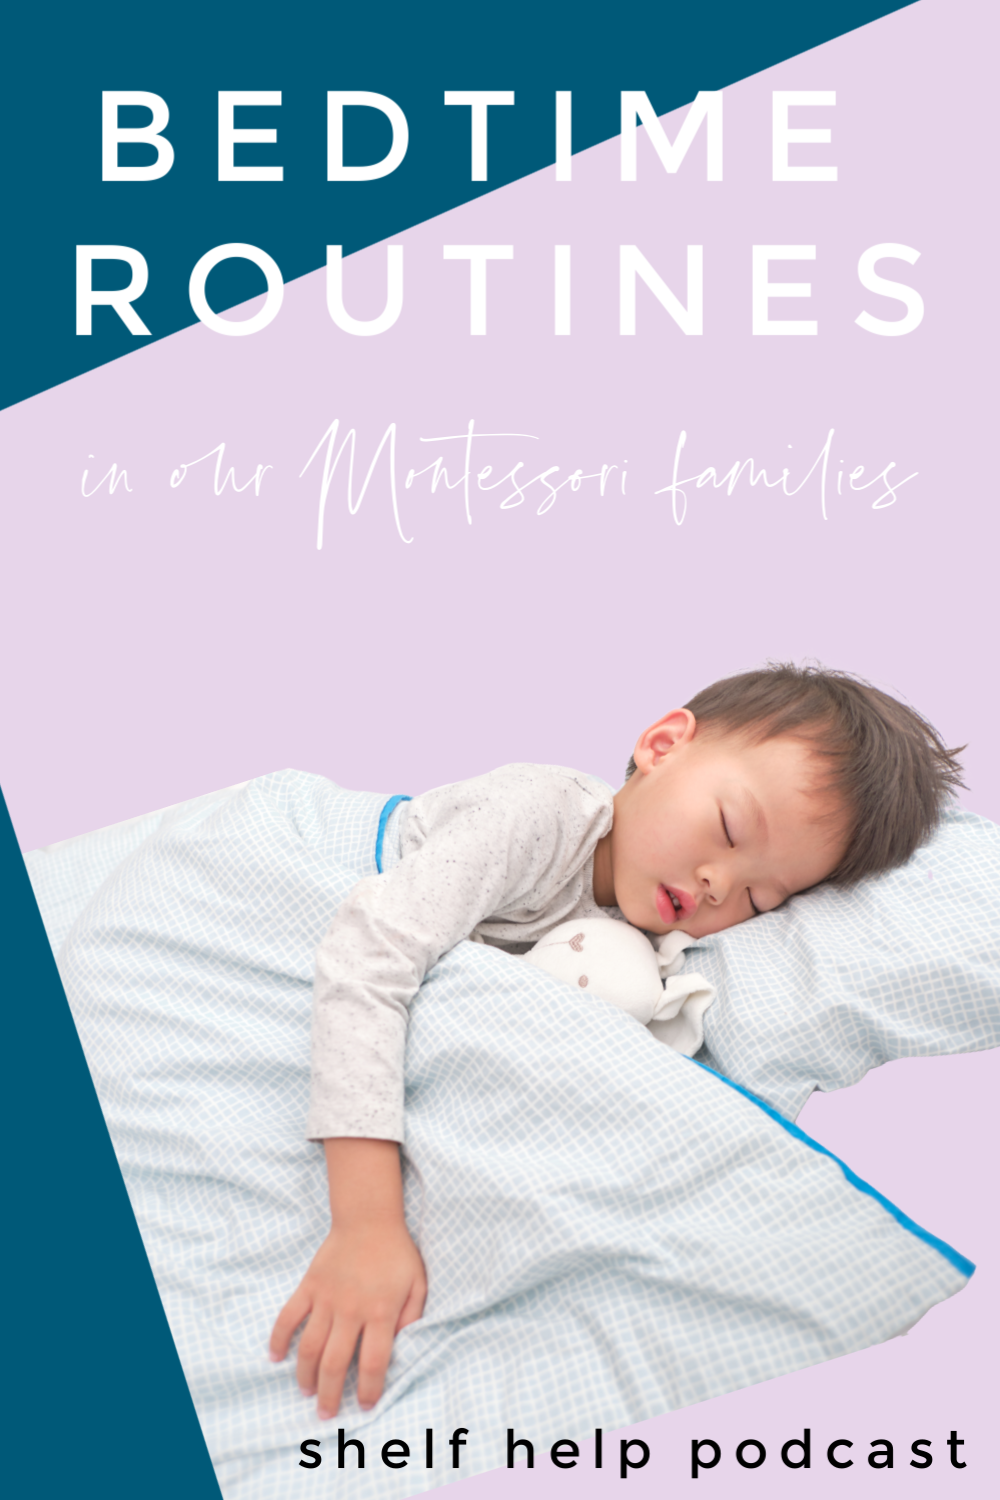 In this parenting advice podcast, we address bedtimes and sleep in our Montessori families. These tips help balance independence and our sleep needs.